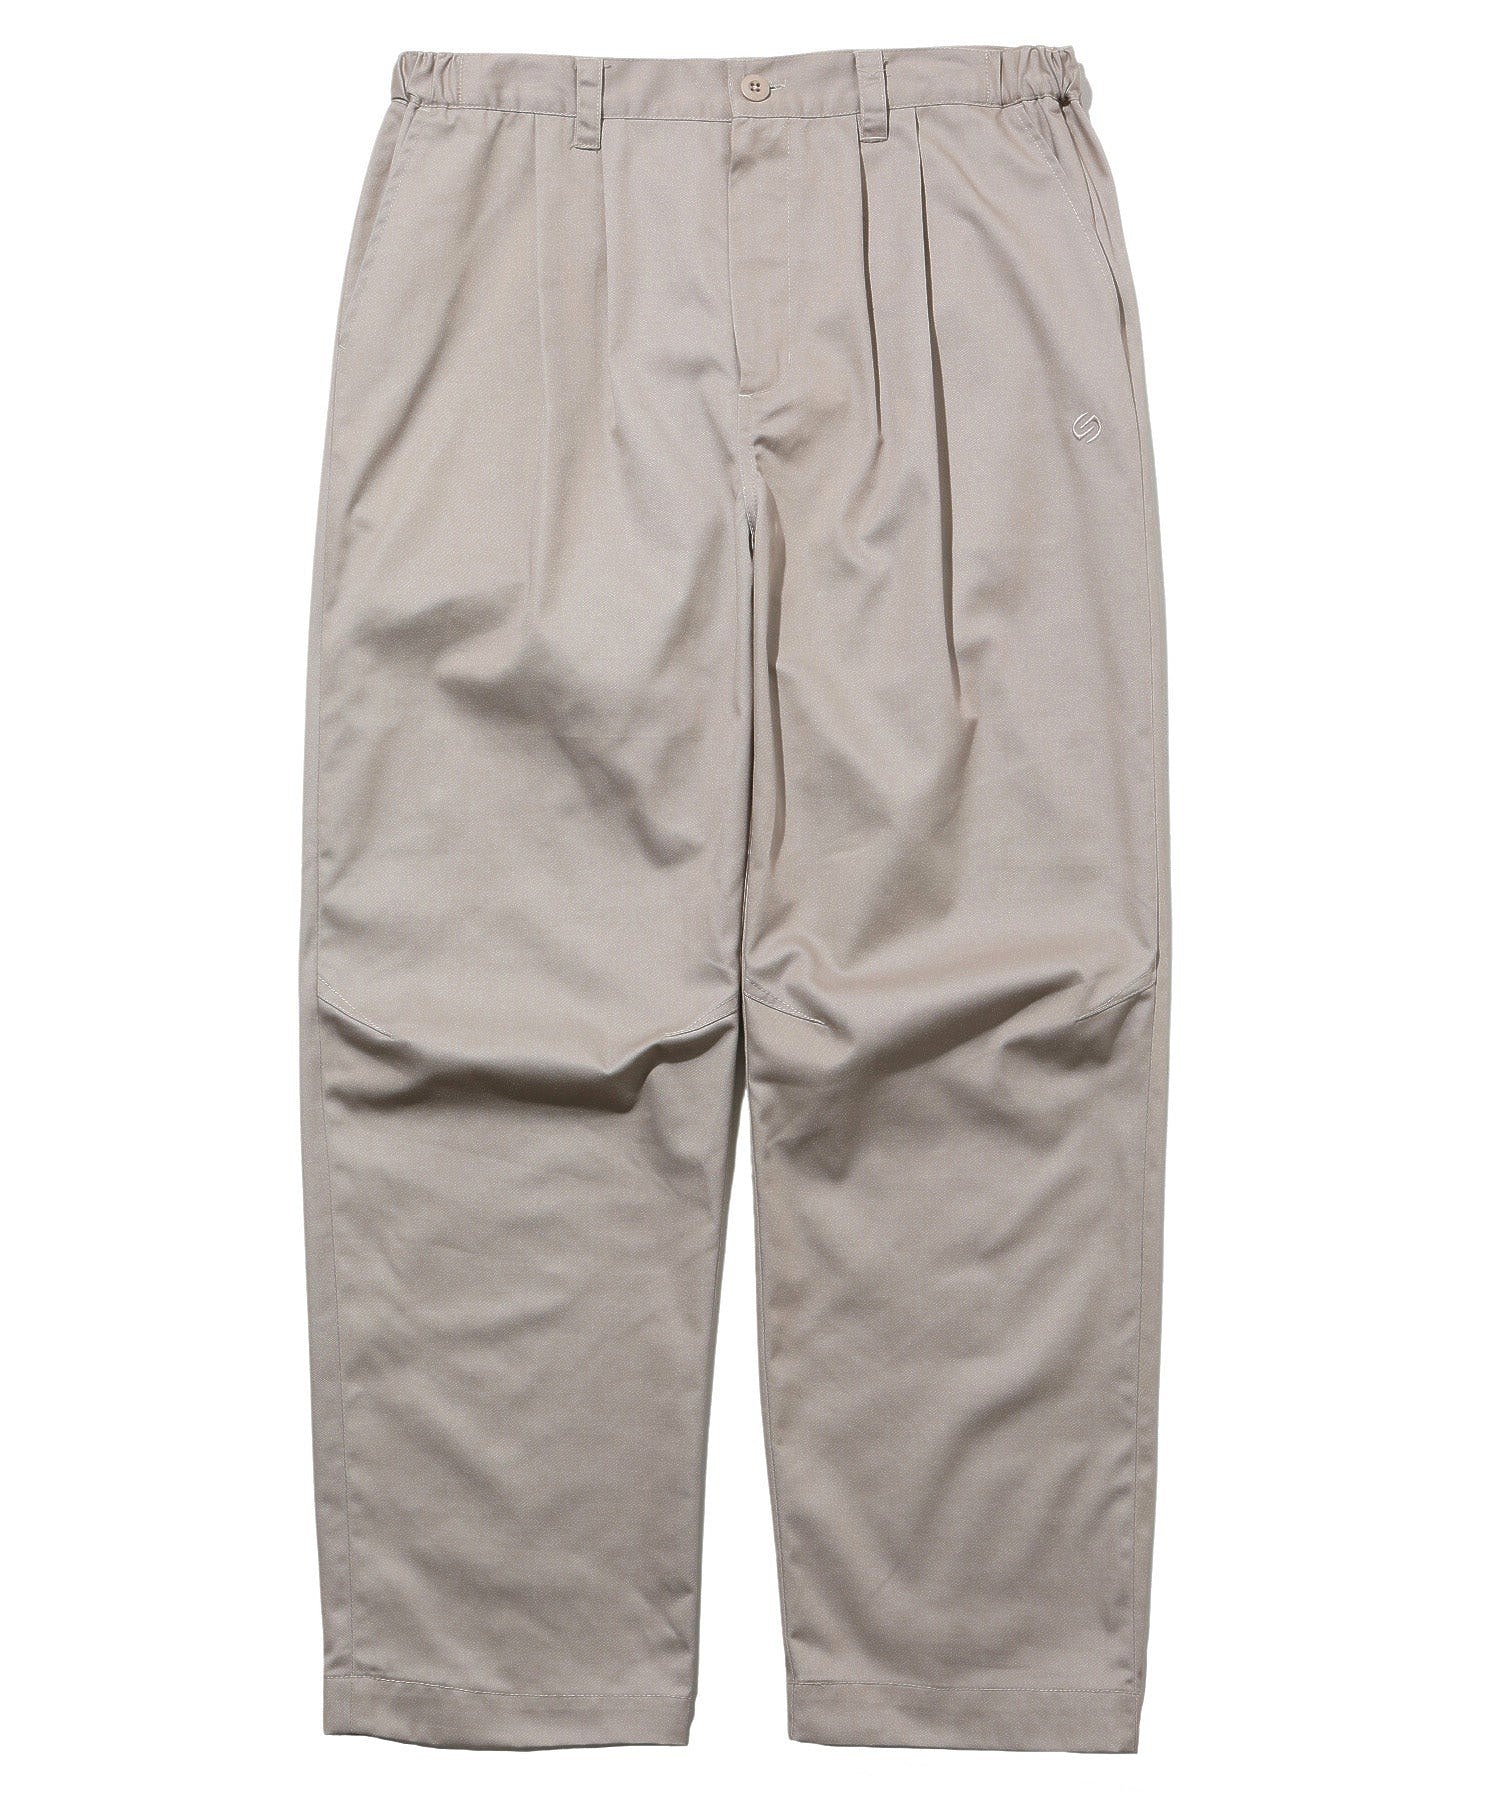 TWO TUCK WORK PANTS SILAS